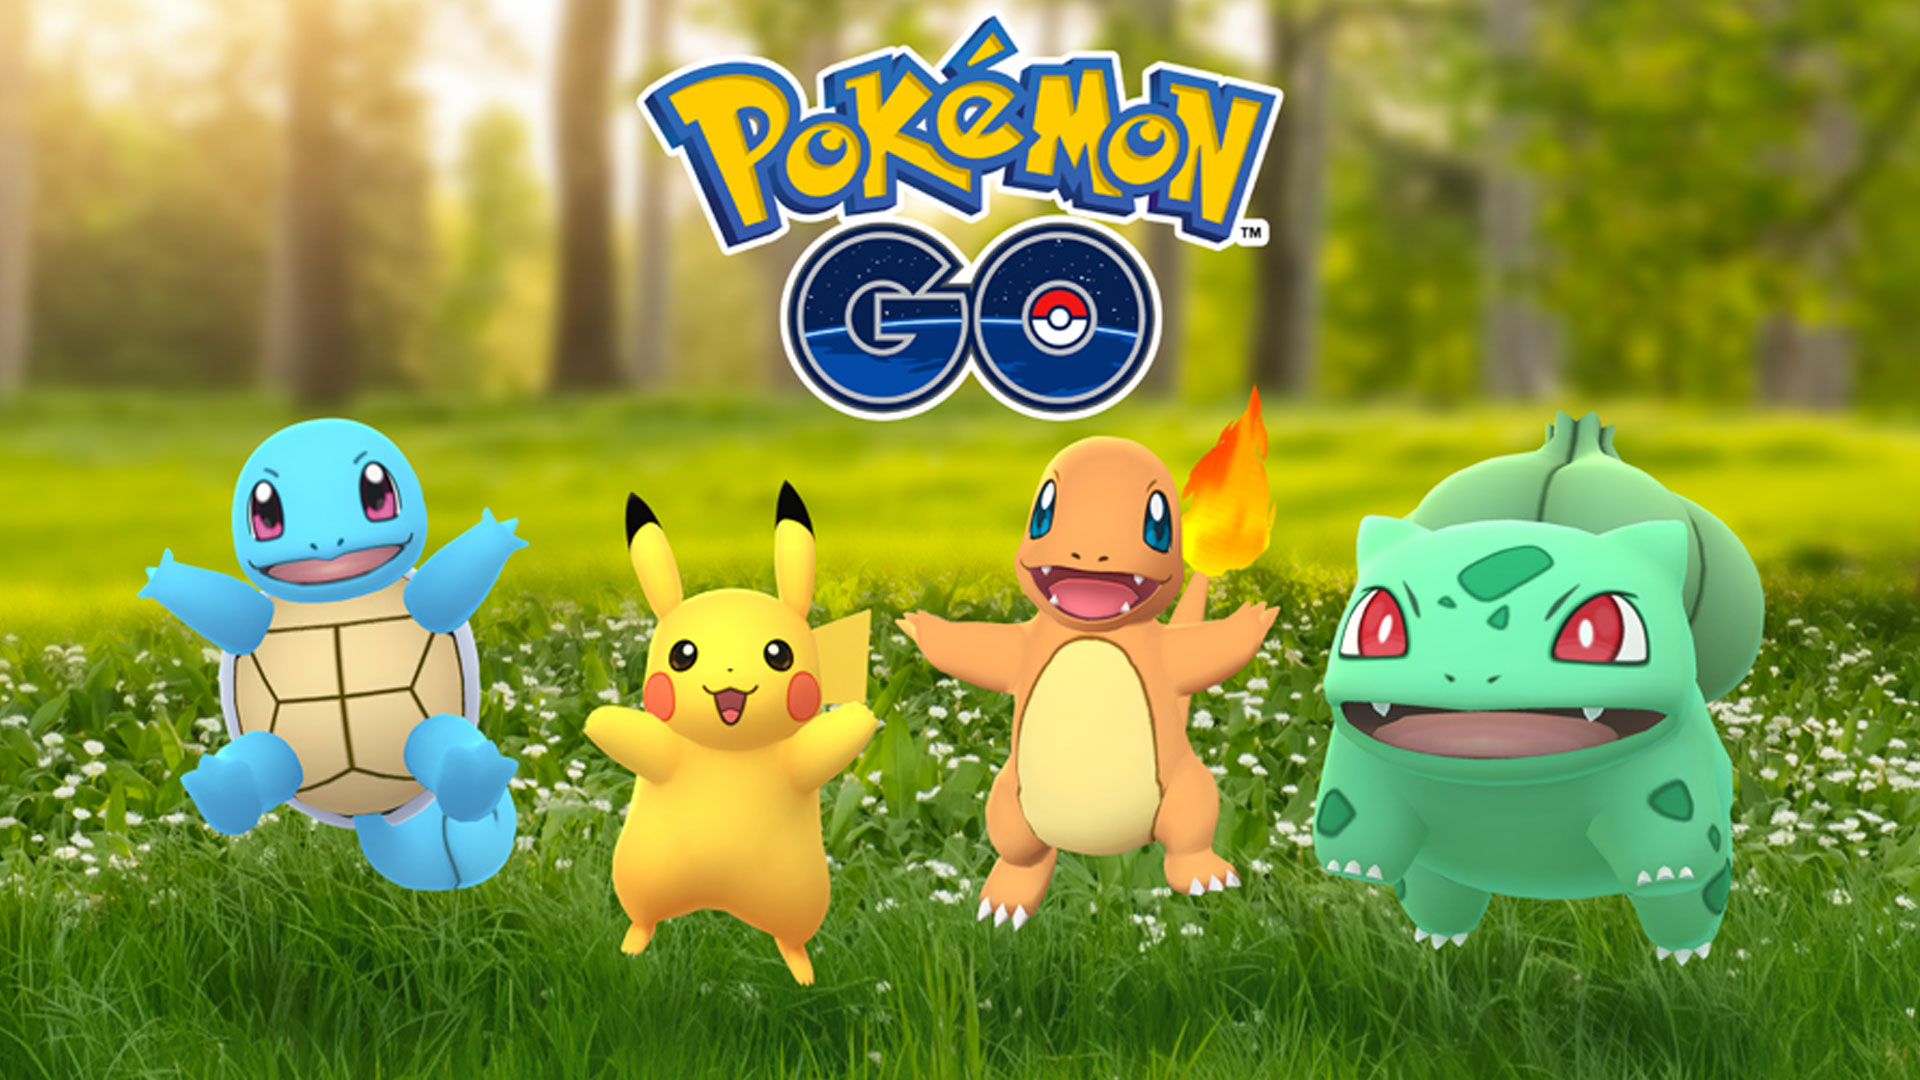 Pokemon Go Hatchathon Event Is Returning This Week, Giving Players A Chance To Hatch Special Pokemon And Earn Bonuses